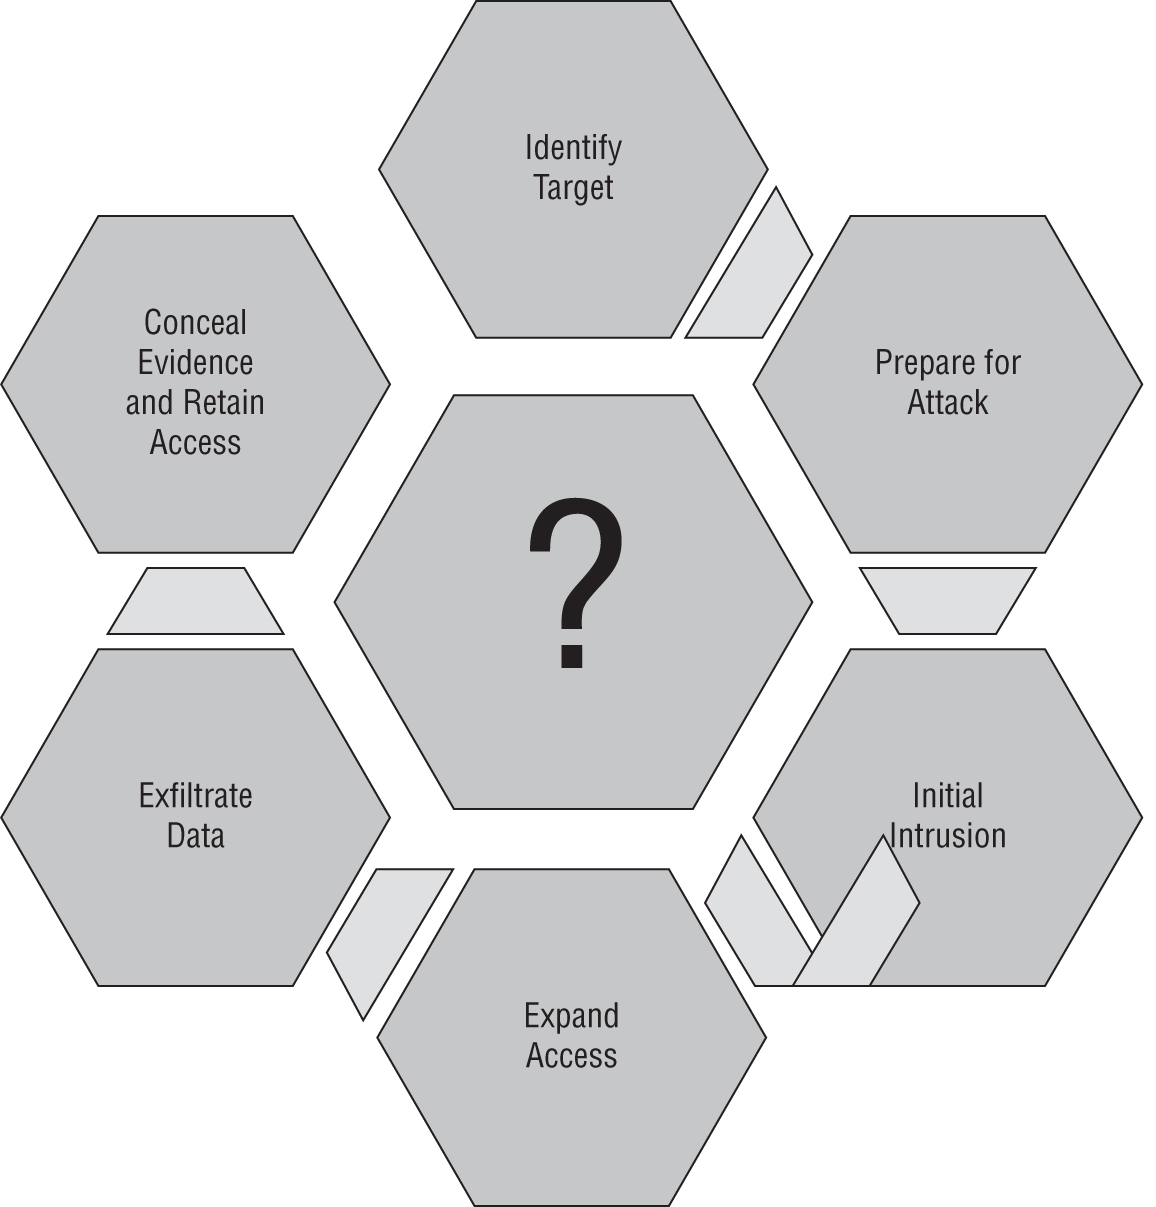 A framework. Identify target, prepare for attack, initial intrusion, expand access, exfiltrate data, and conceal evidence and retain access are the components.